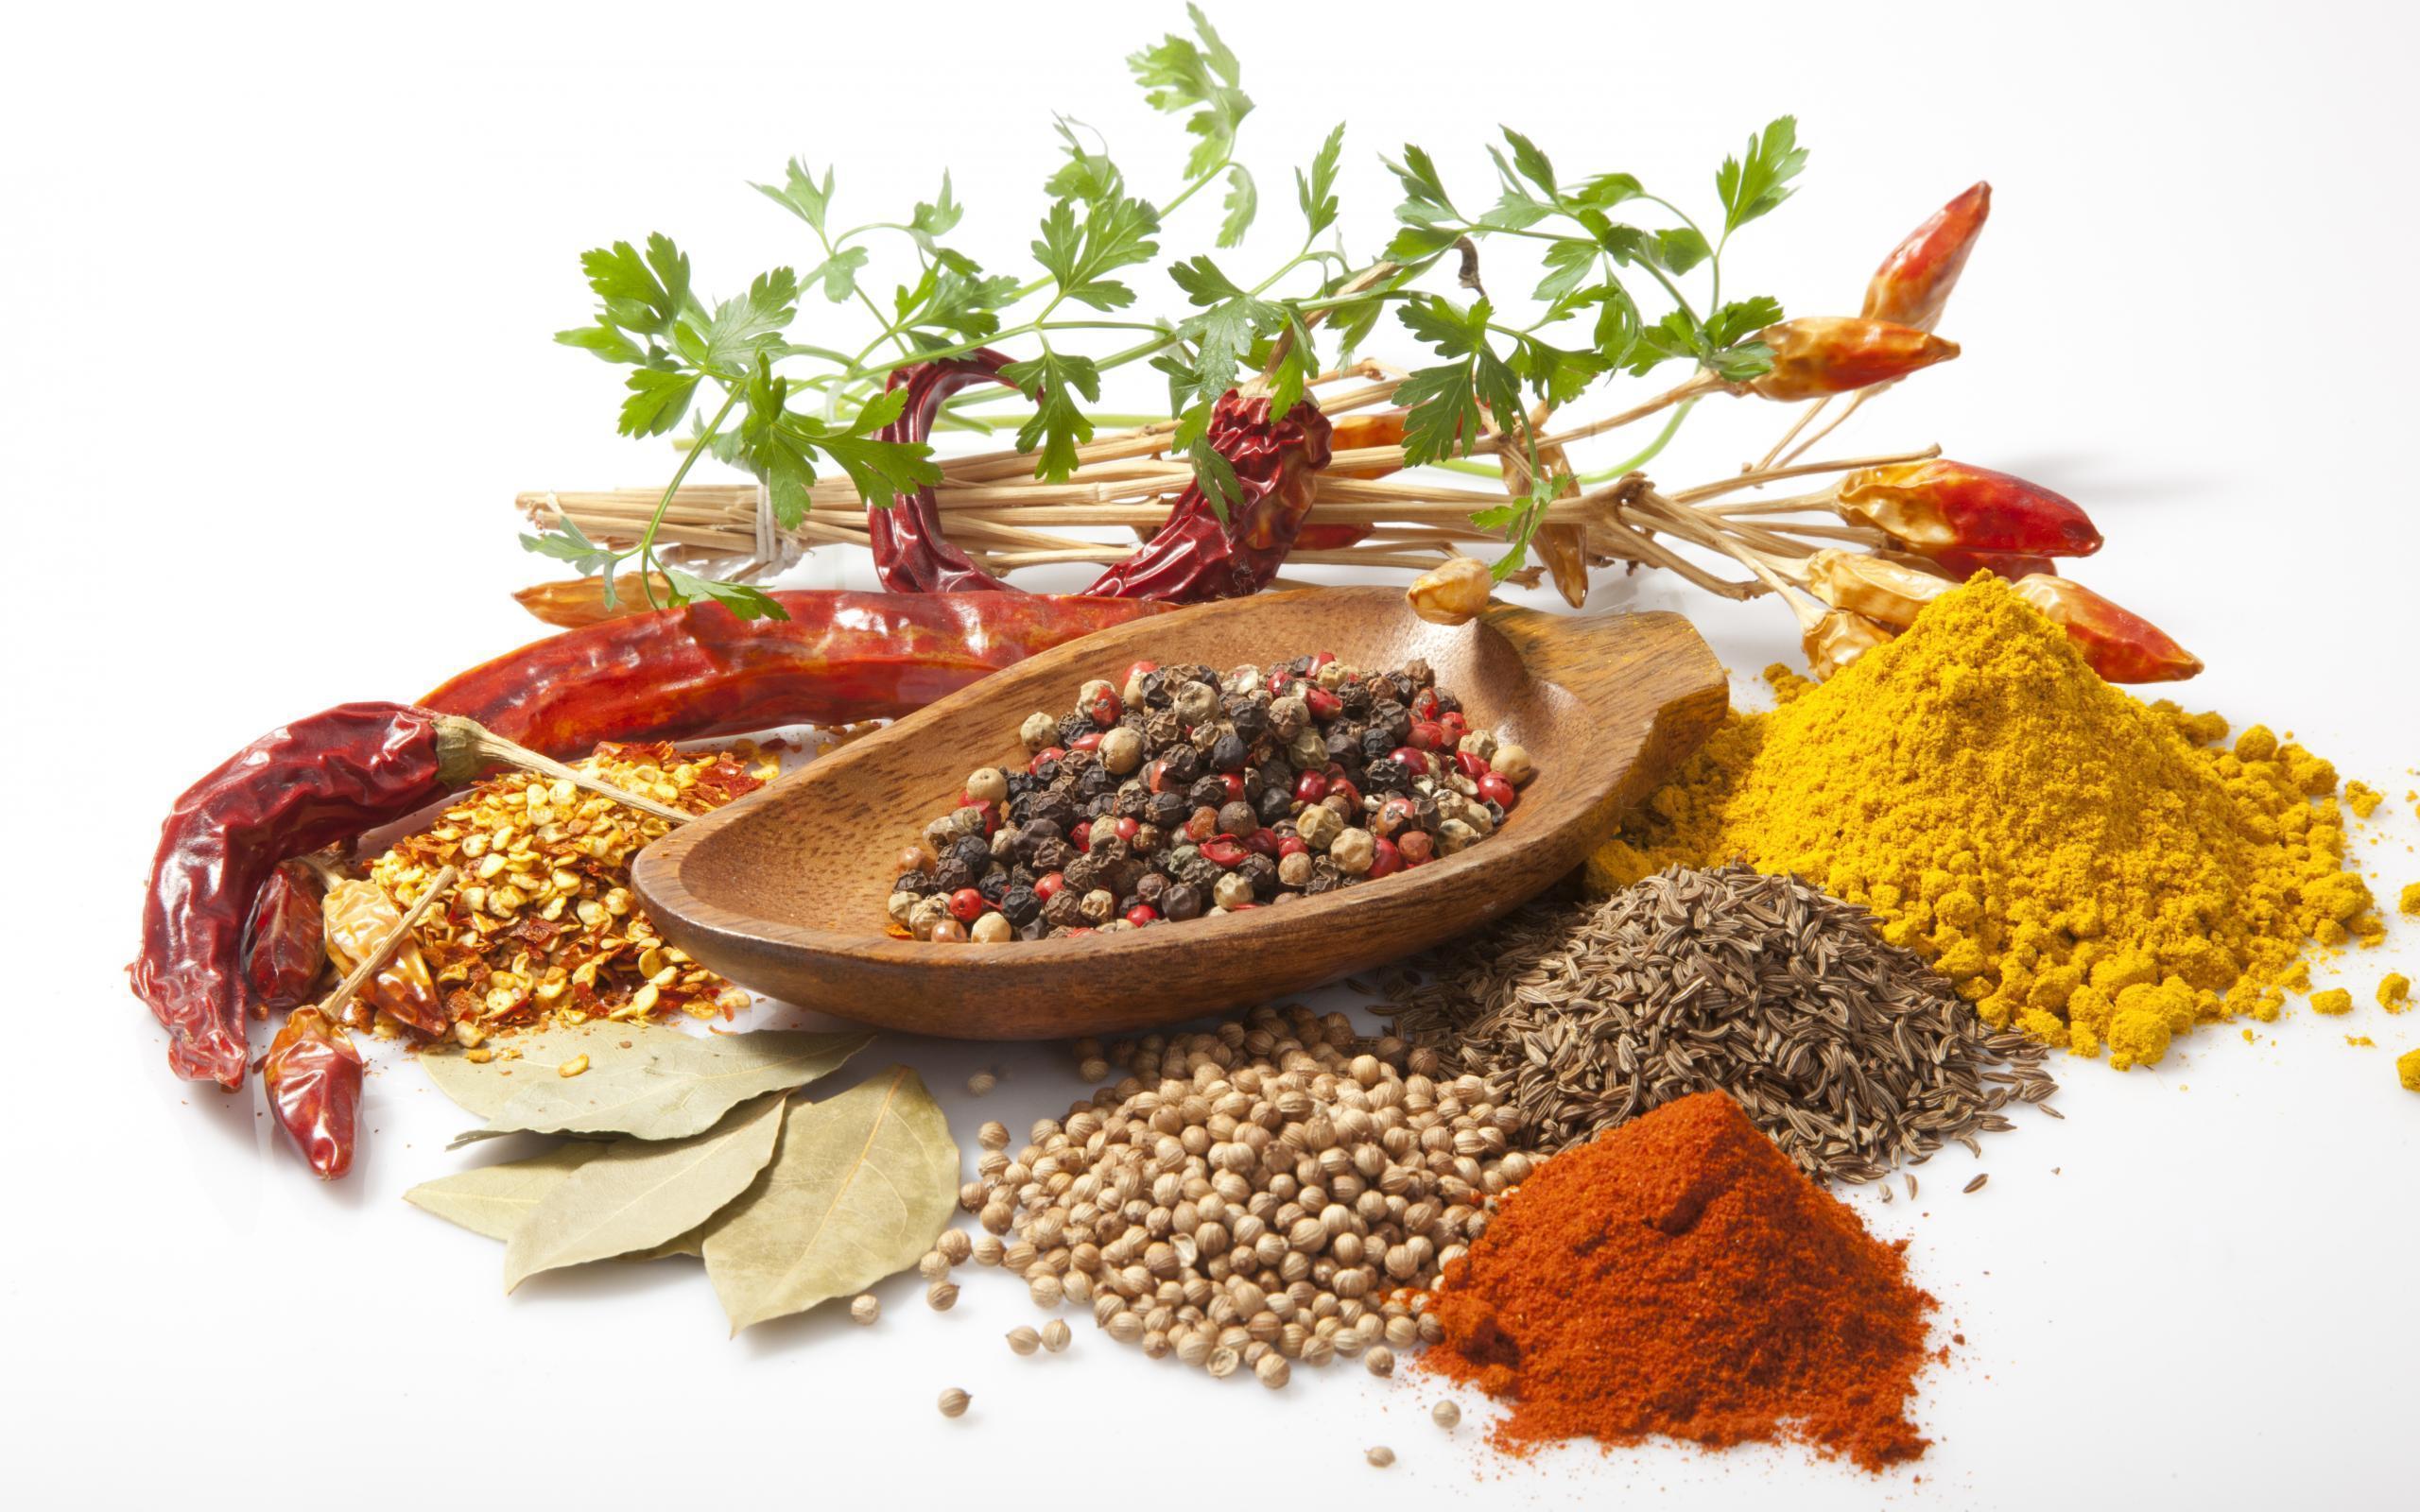 Herbs and Spices Computer Wallpaper, Desktop Background